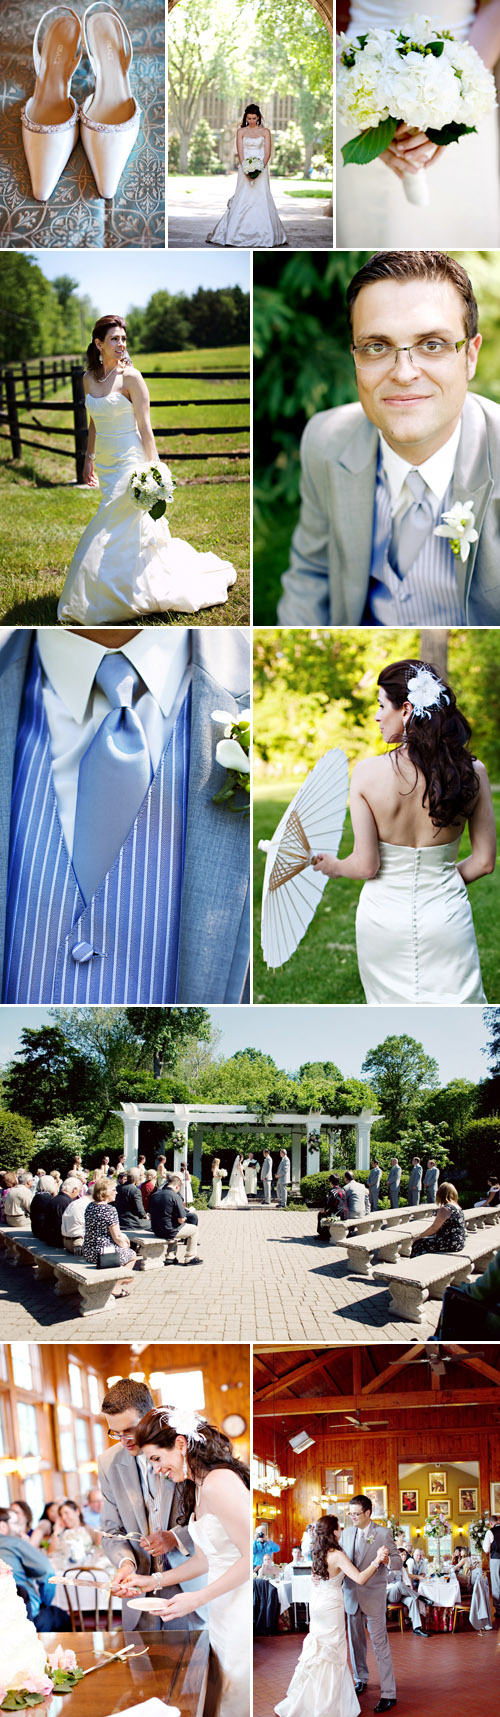 Michigan garden wedding style, Wellers Carriage House, photos by Jen Lynne Photography